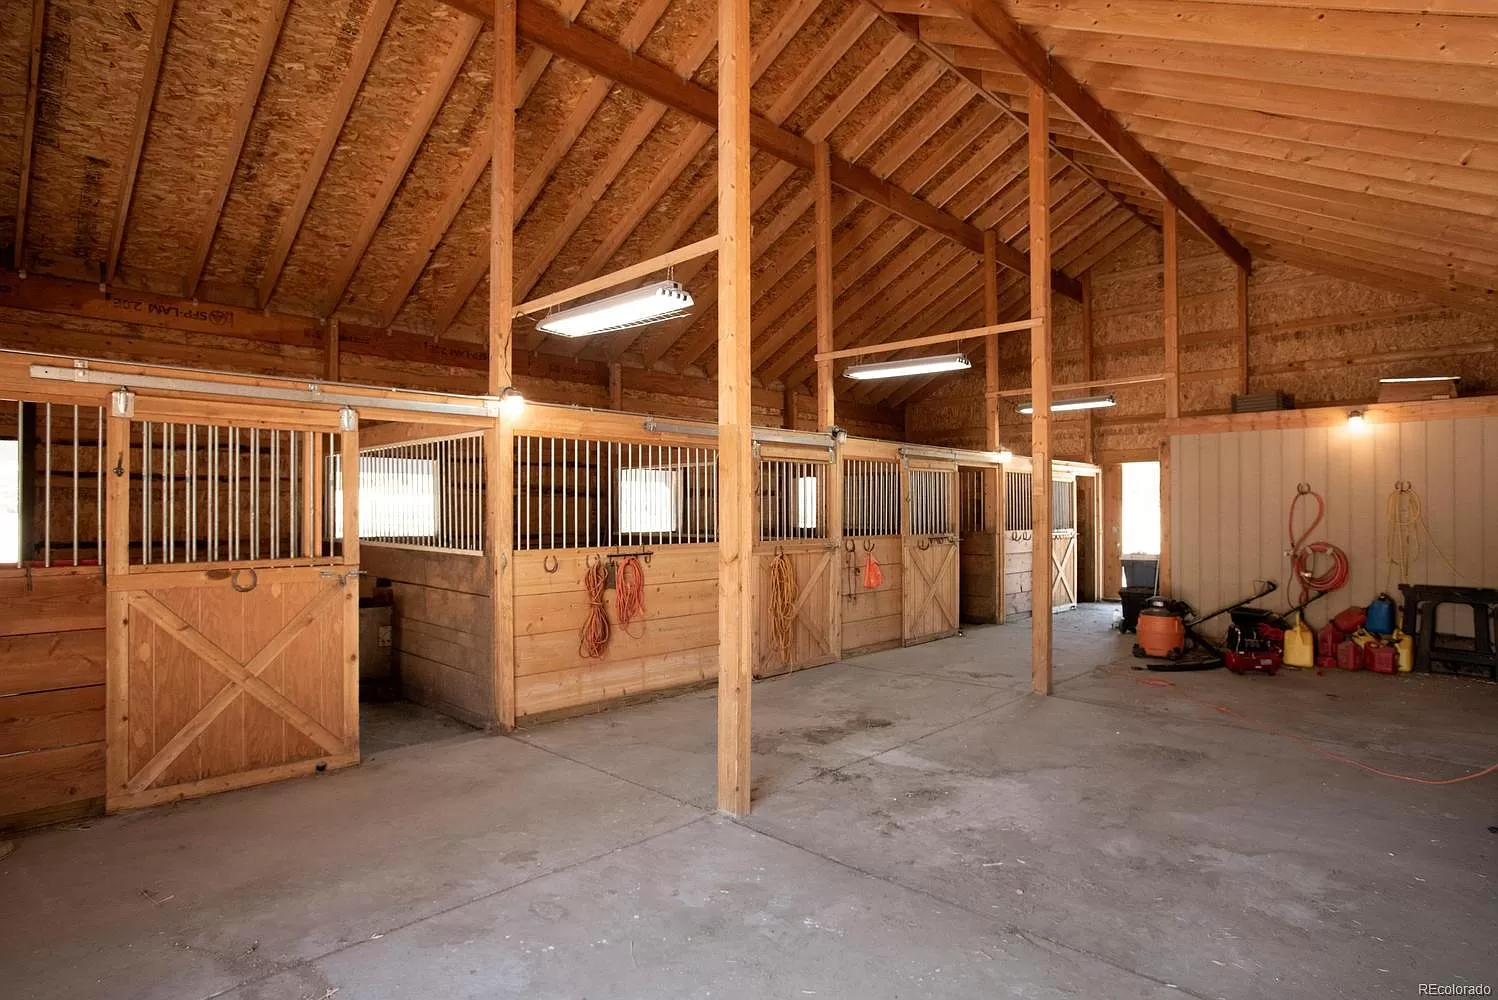 A barn with many stalls and horses inside of it